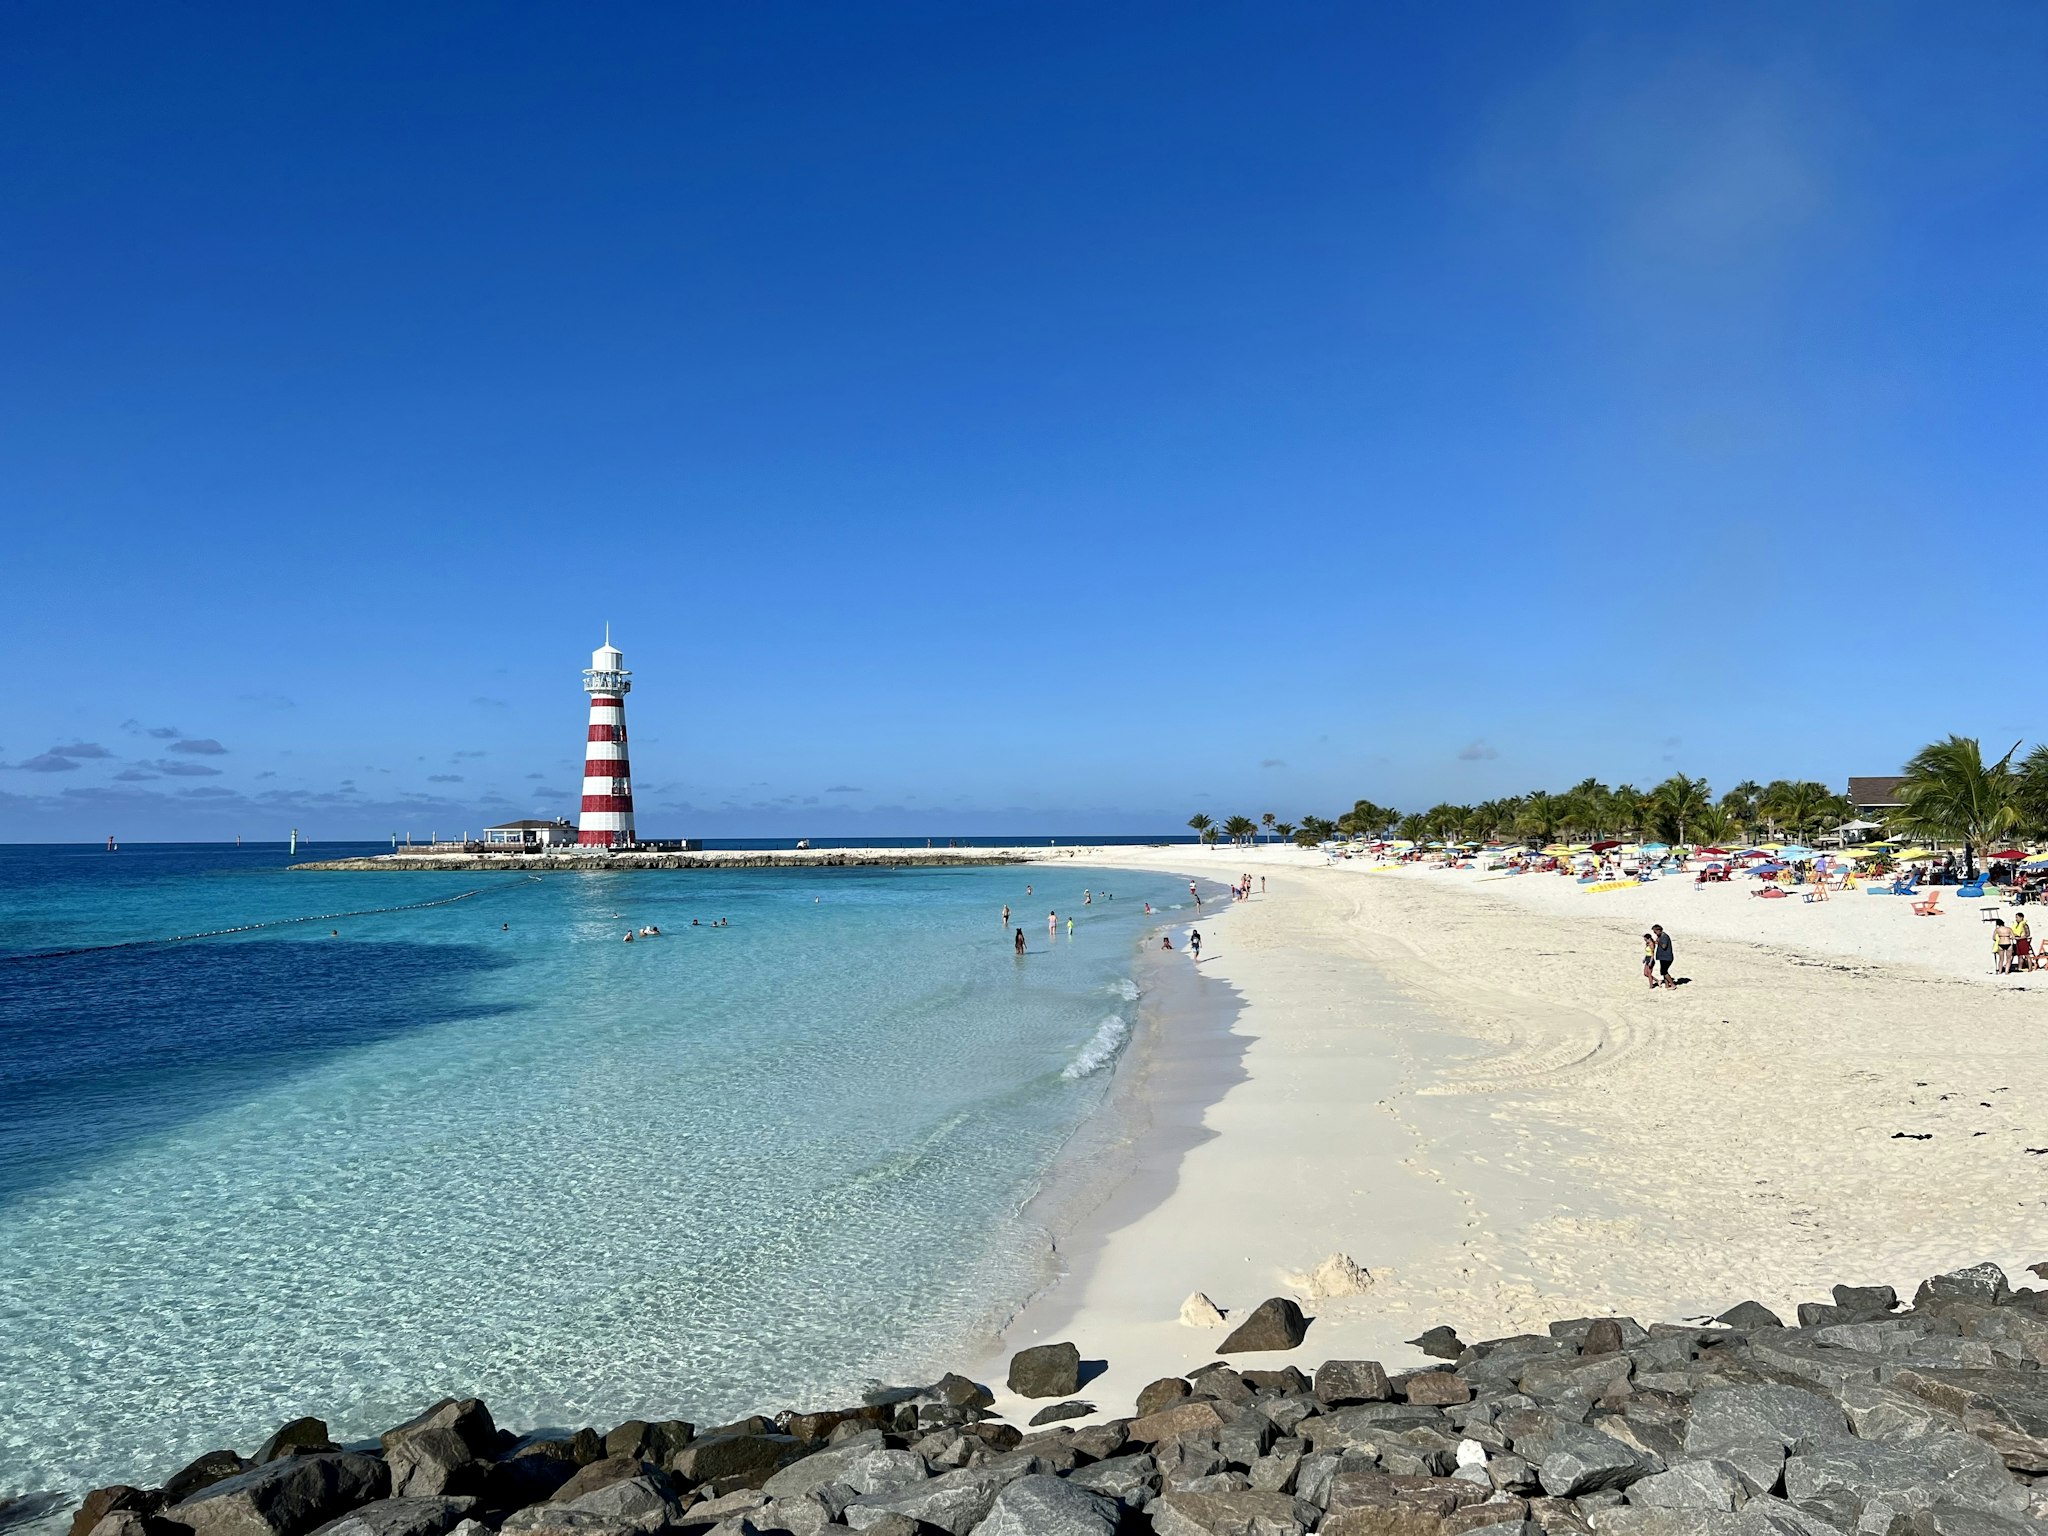 Beach and Lighthouse at Ocean Cay, MSC's private island in the Bahamas (Photo: Jorge Oliver)